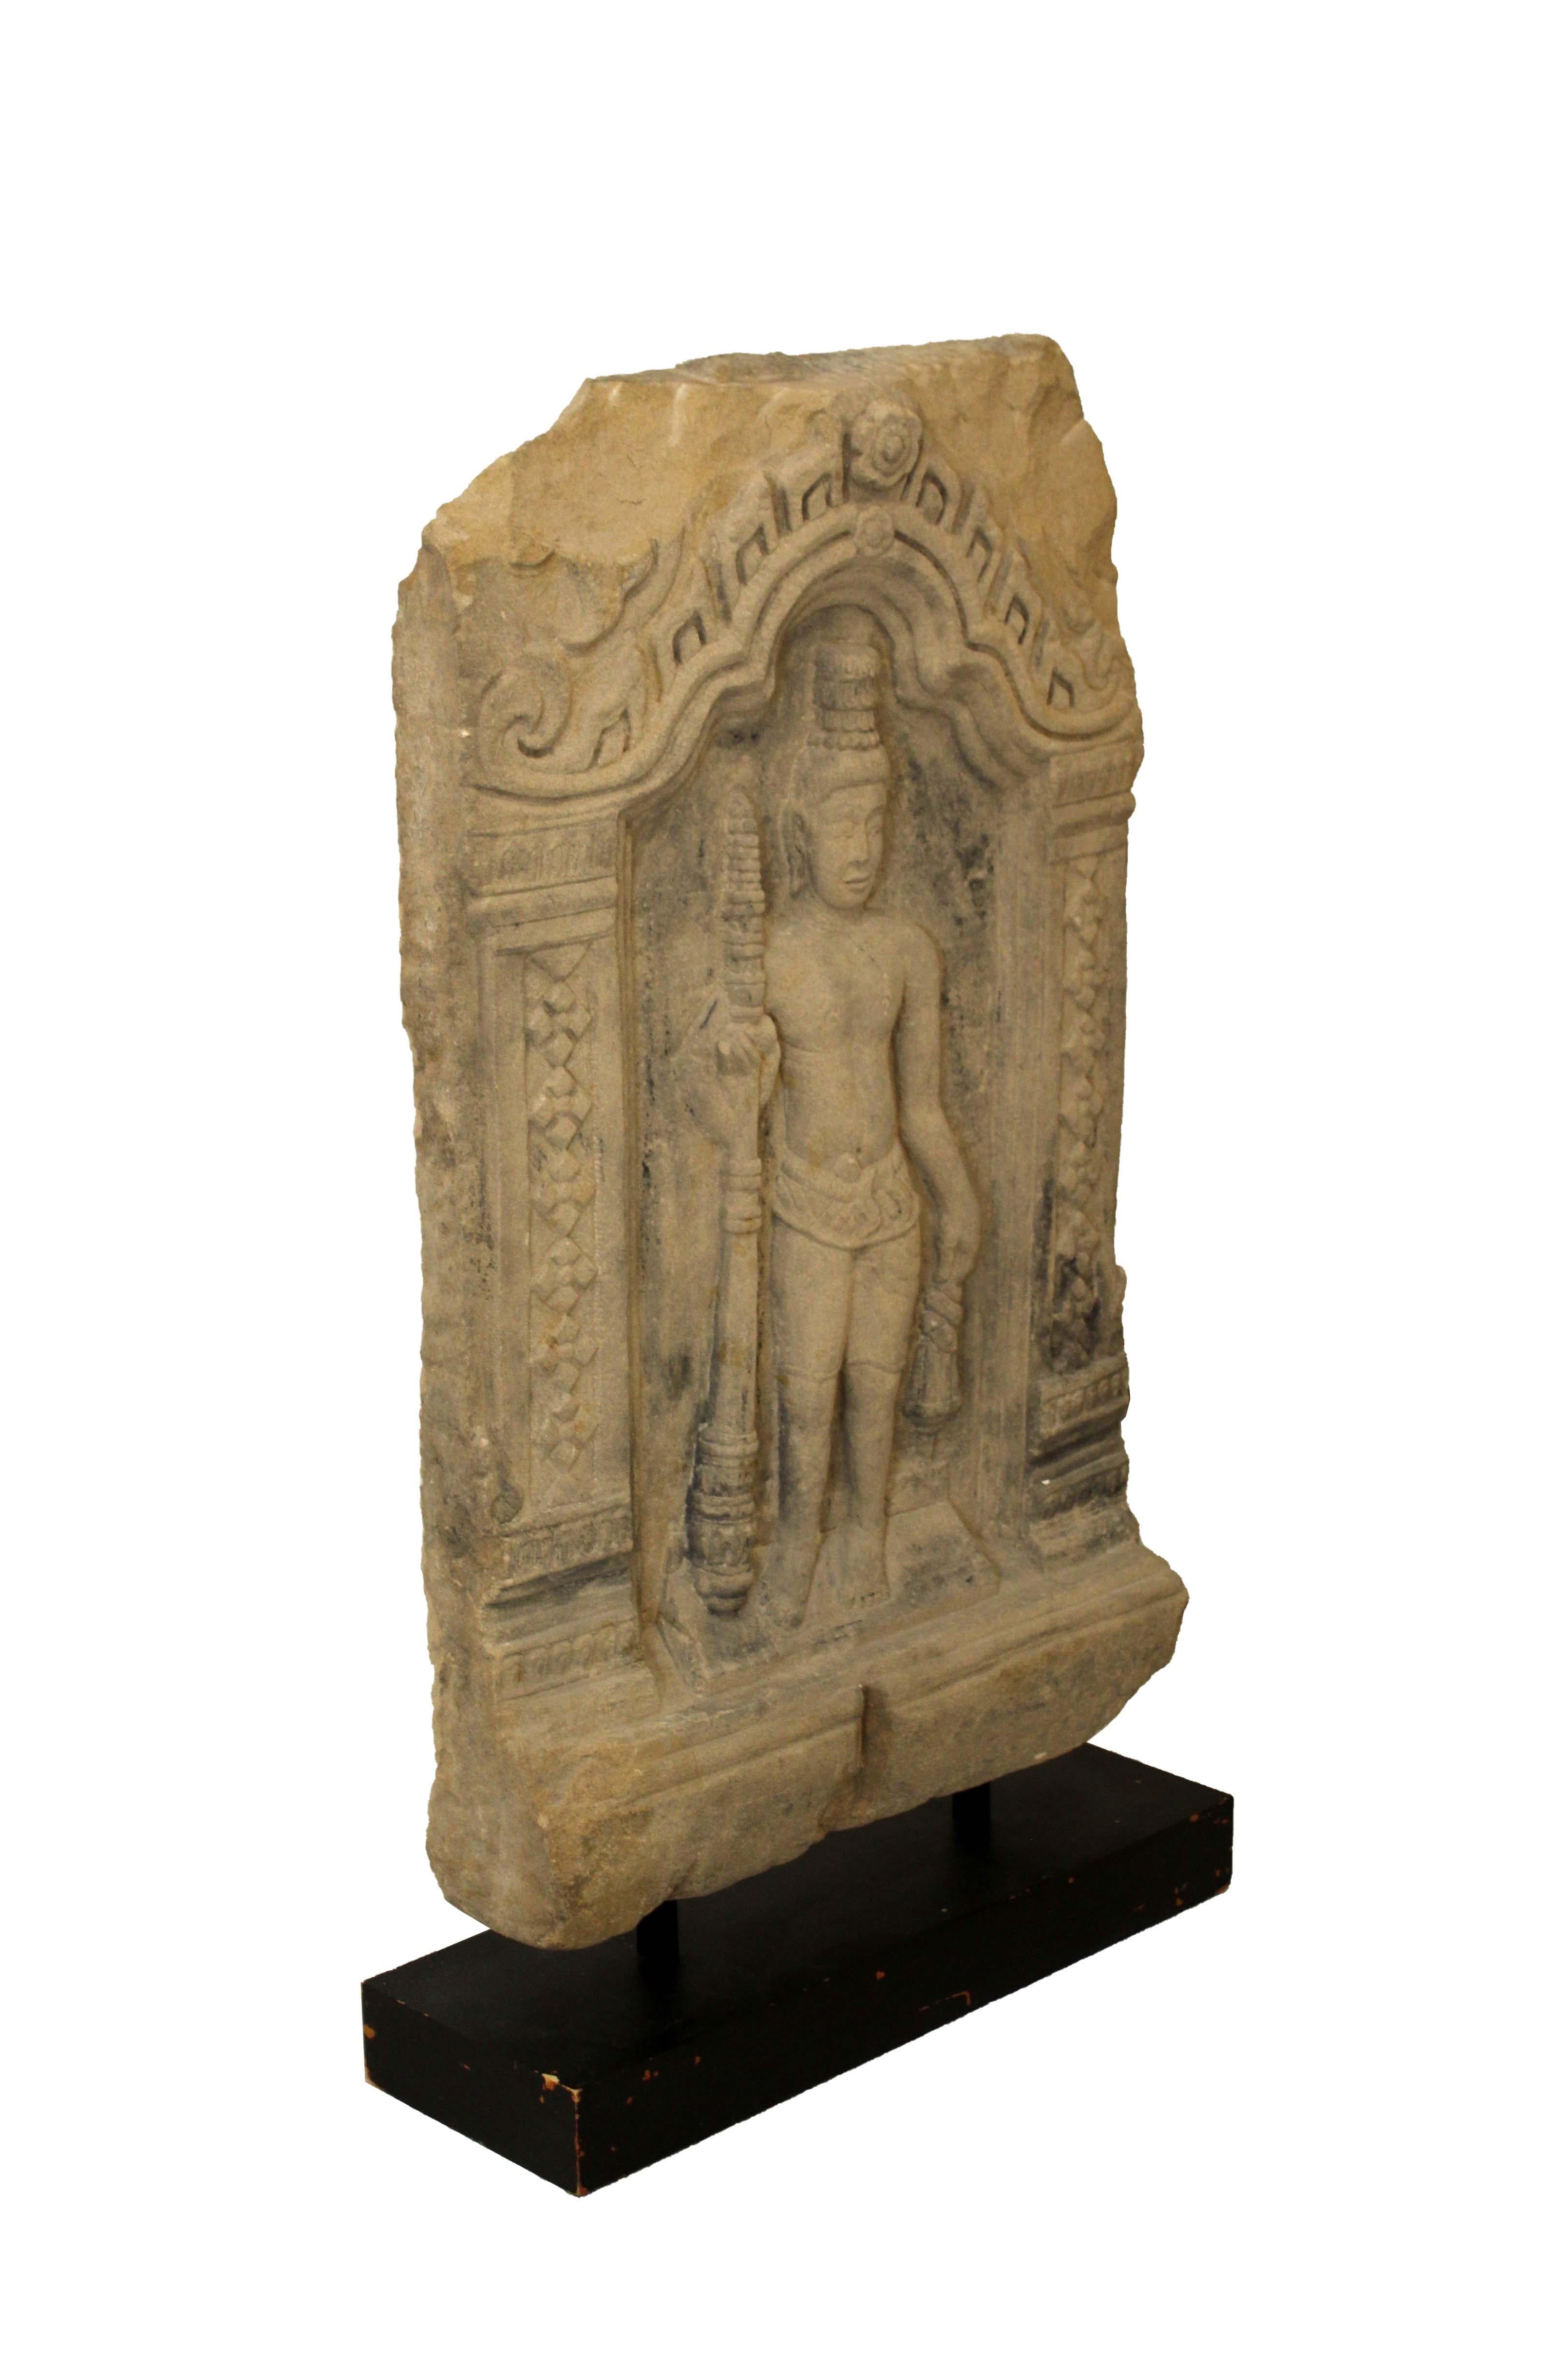 A unique artifact inspired collector’s item – an antique temple stele, or stone slab. From a private collection. Dimensions: 34.5H x 19.75W x 6.75D. In very good vintage condition.
 